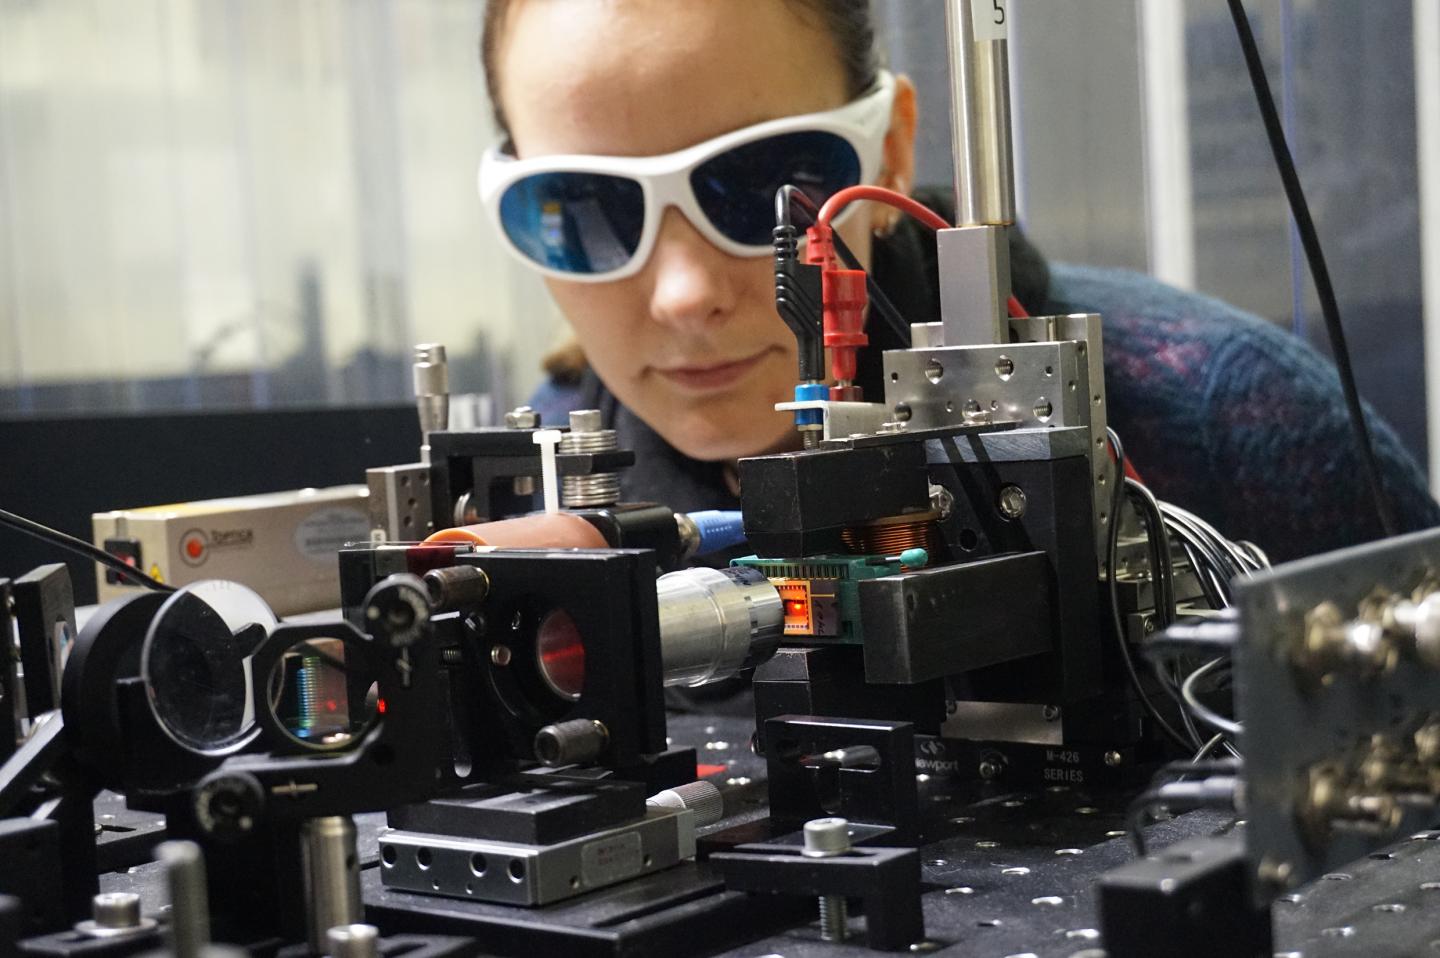 In experiments, including those at the University of Greifswald, researchers are testing which material can generate spin current most effectively. Source: University of Greifswald